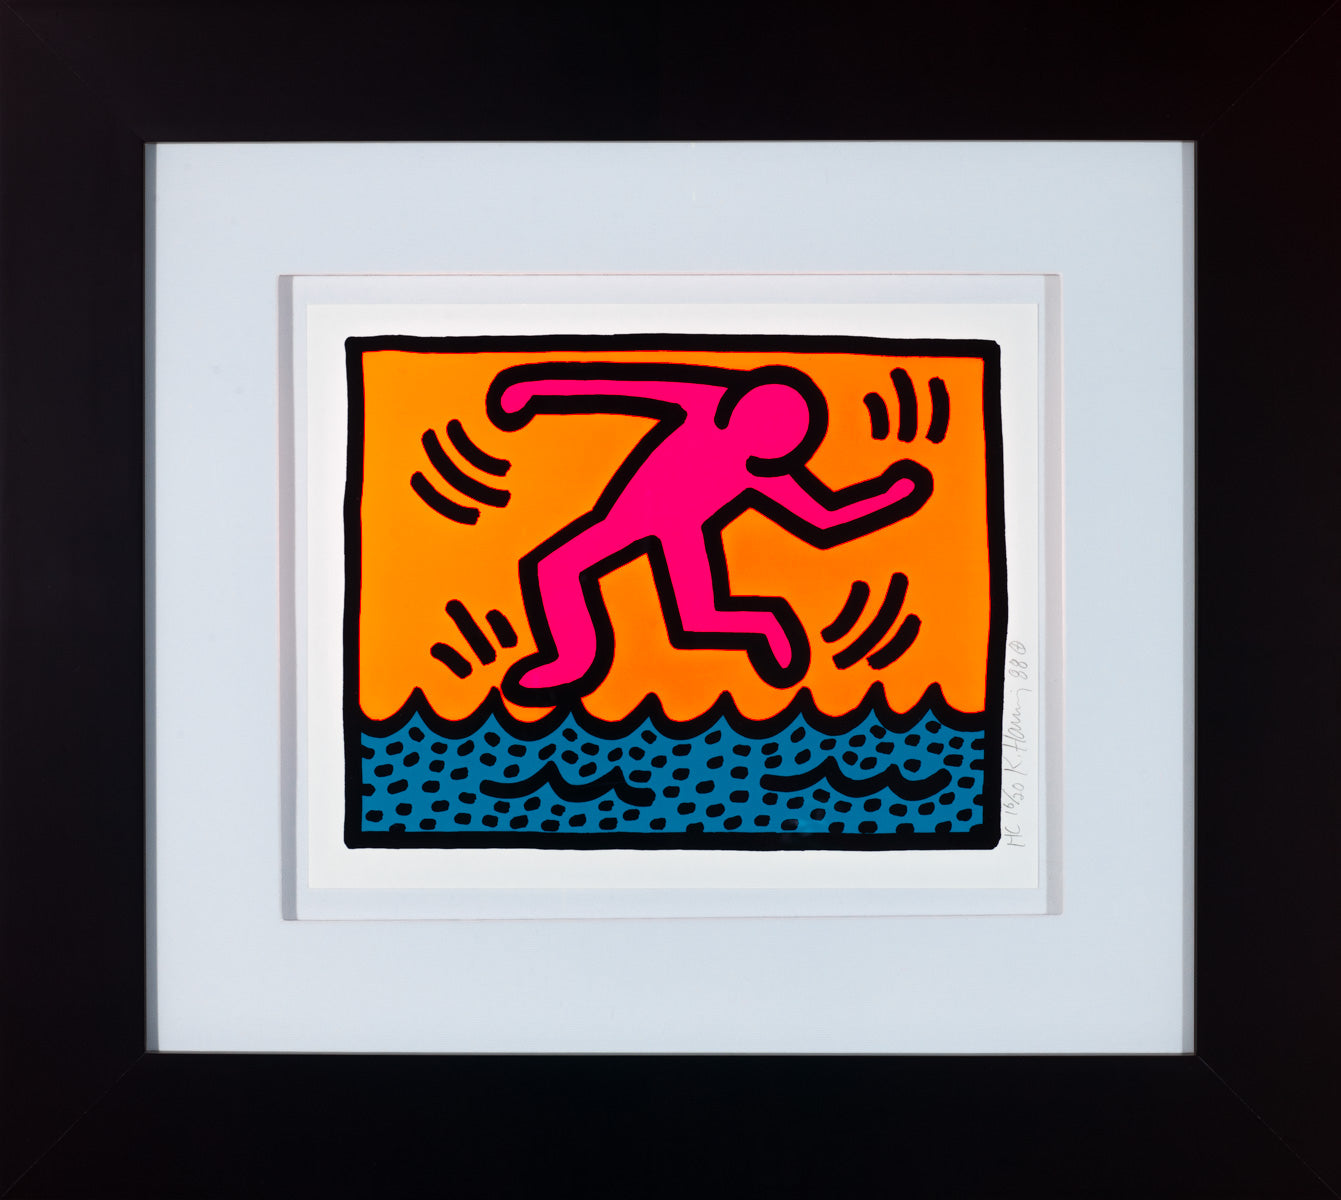 Untitled, 1988 (Pop Shop II - A) by Keith Haring